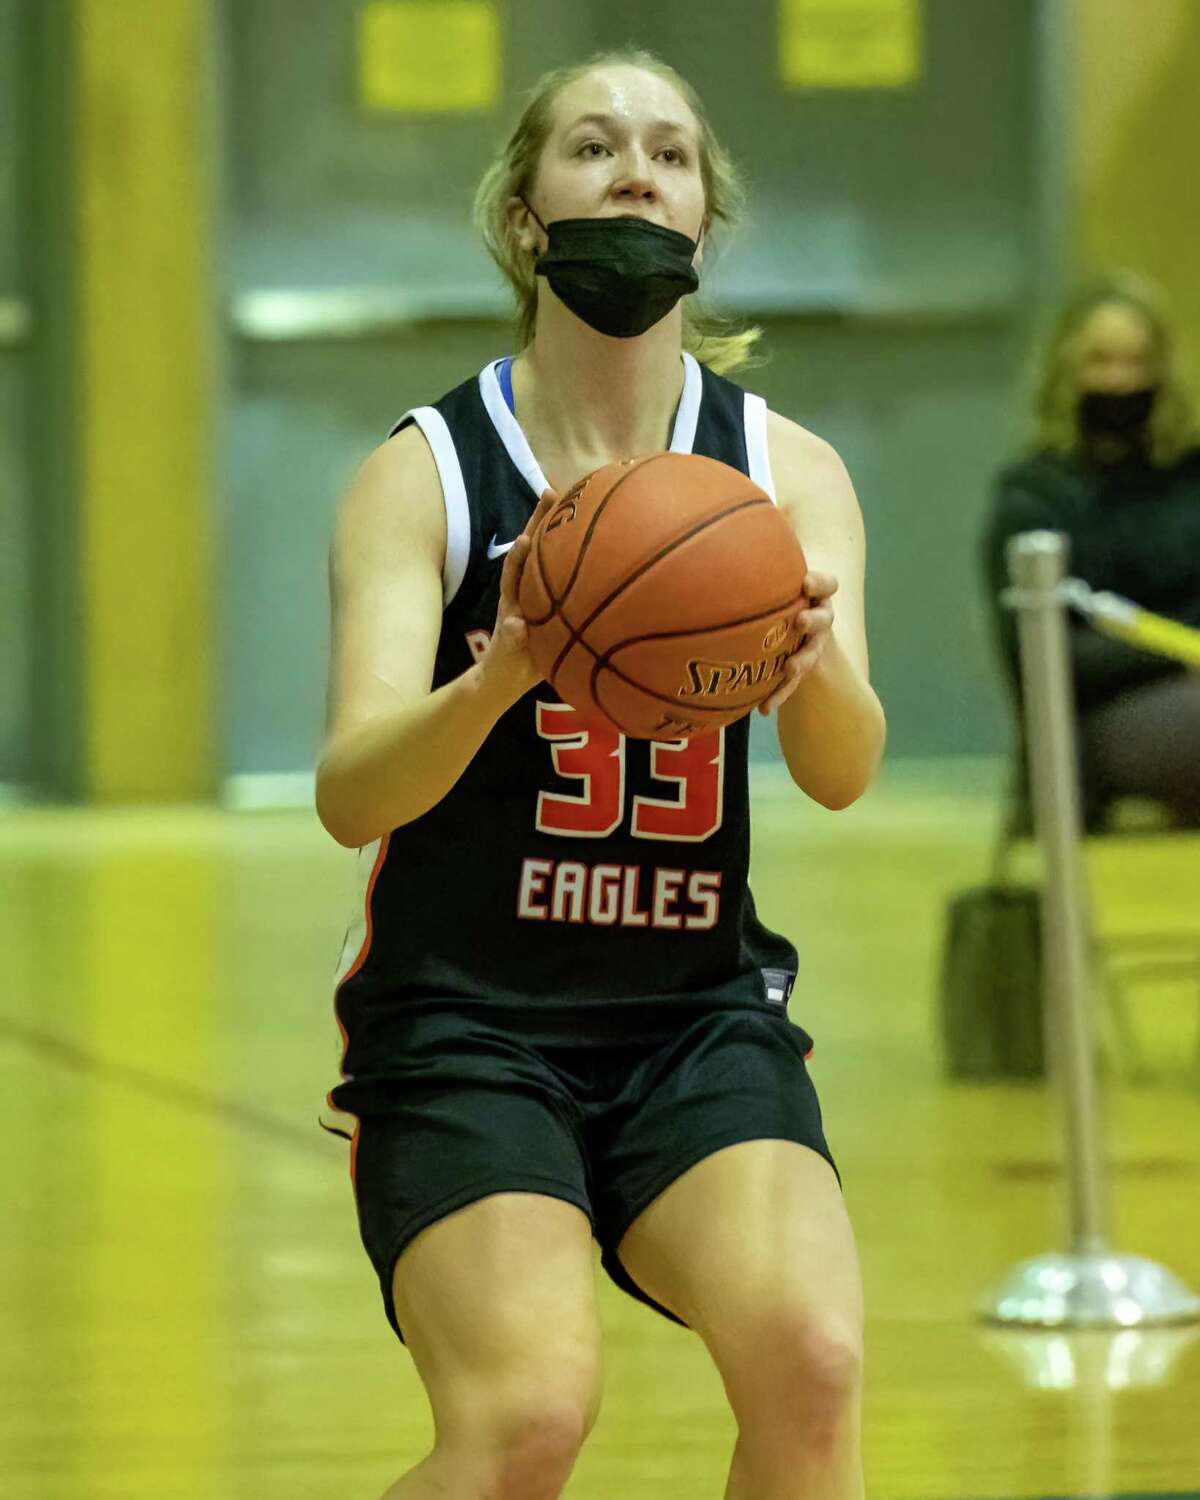 Maren Louridas of Bethlehem is averaging 15.4 points, 8.8 rebounds, 3.4 assists and 2.5 steals per game this season. She said she's gotten better at passing and finding open shots for her teammates.